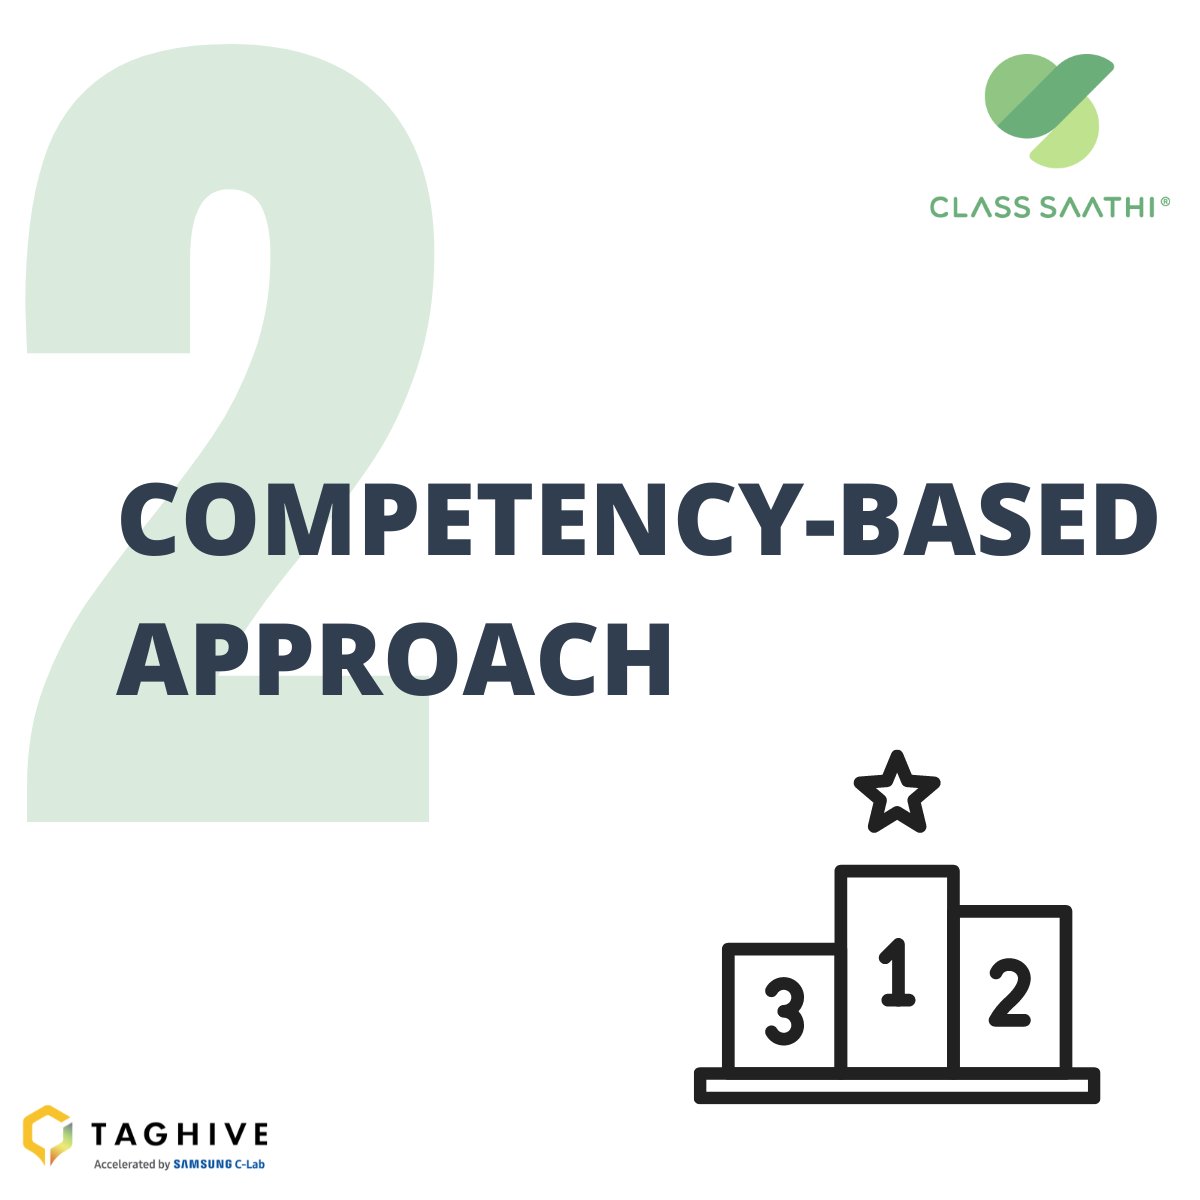 Revolutionize assessment with #ClassSaathi – aligned with #SAFAL for #holisticlearning!

Measure true skills, track progress in real-time, and empower every learner to succeed!